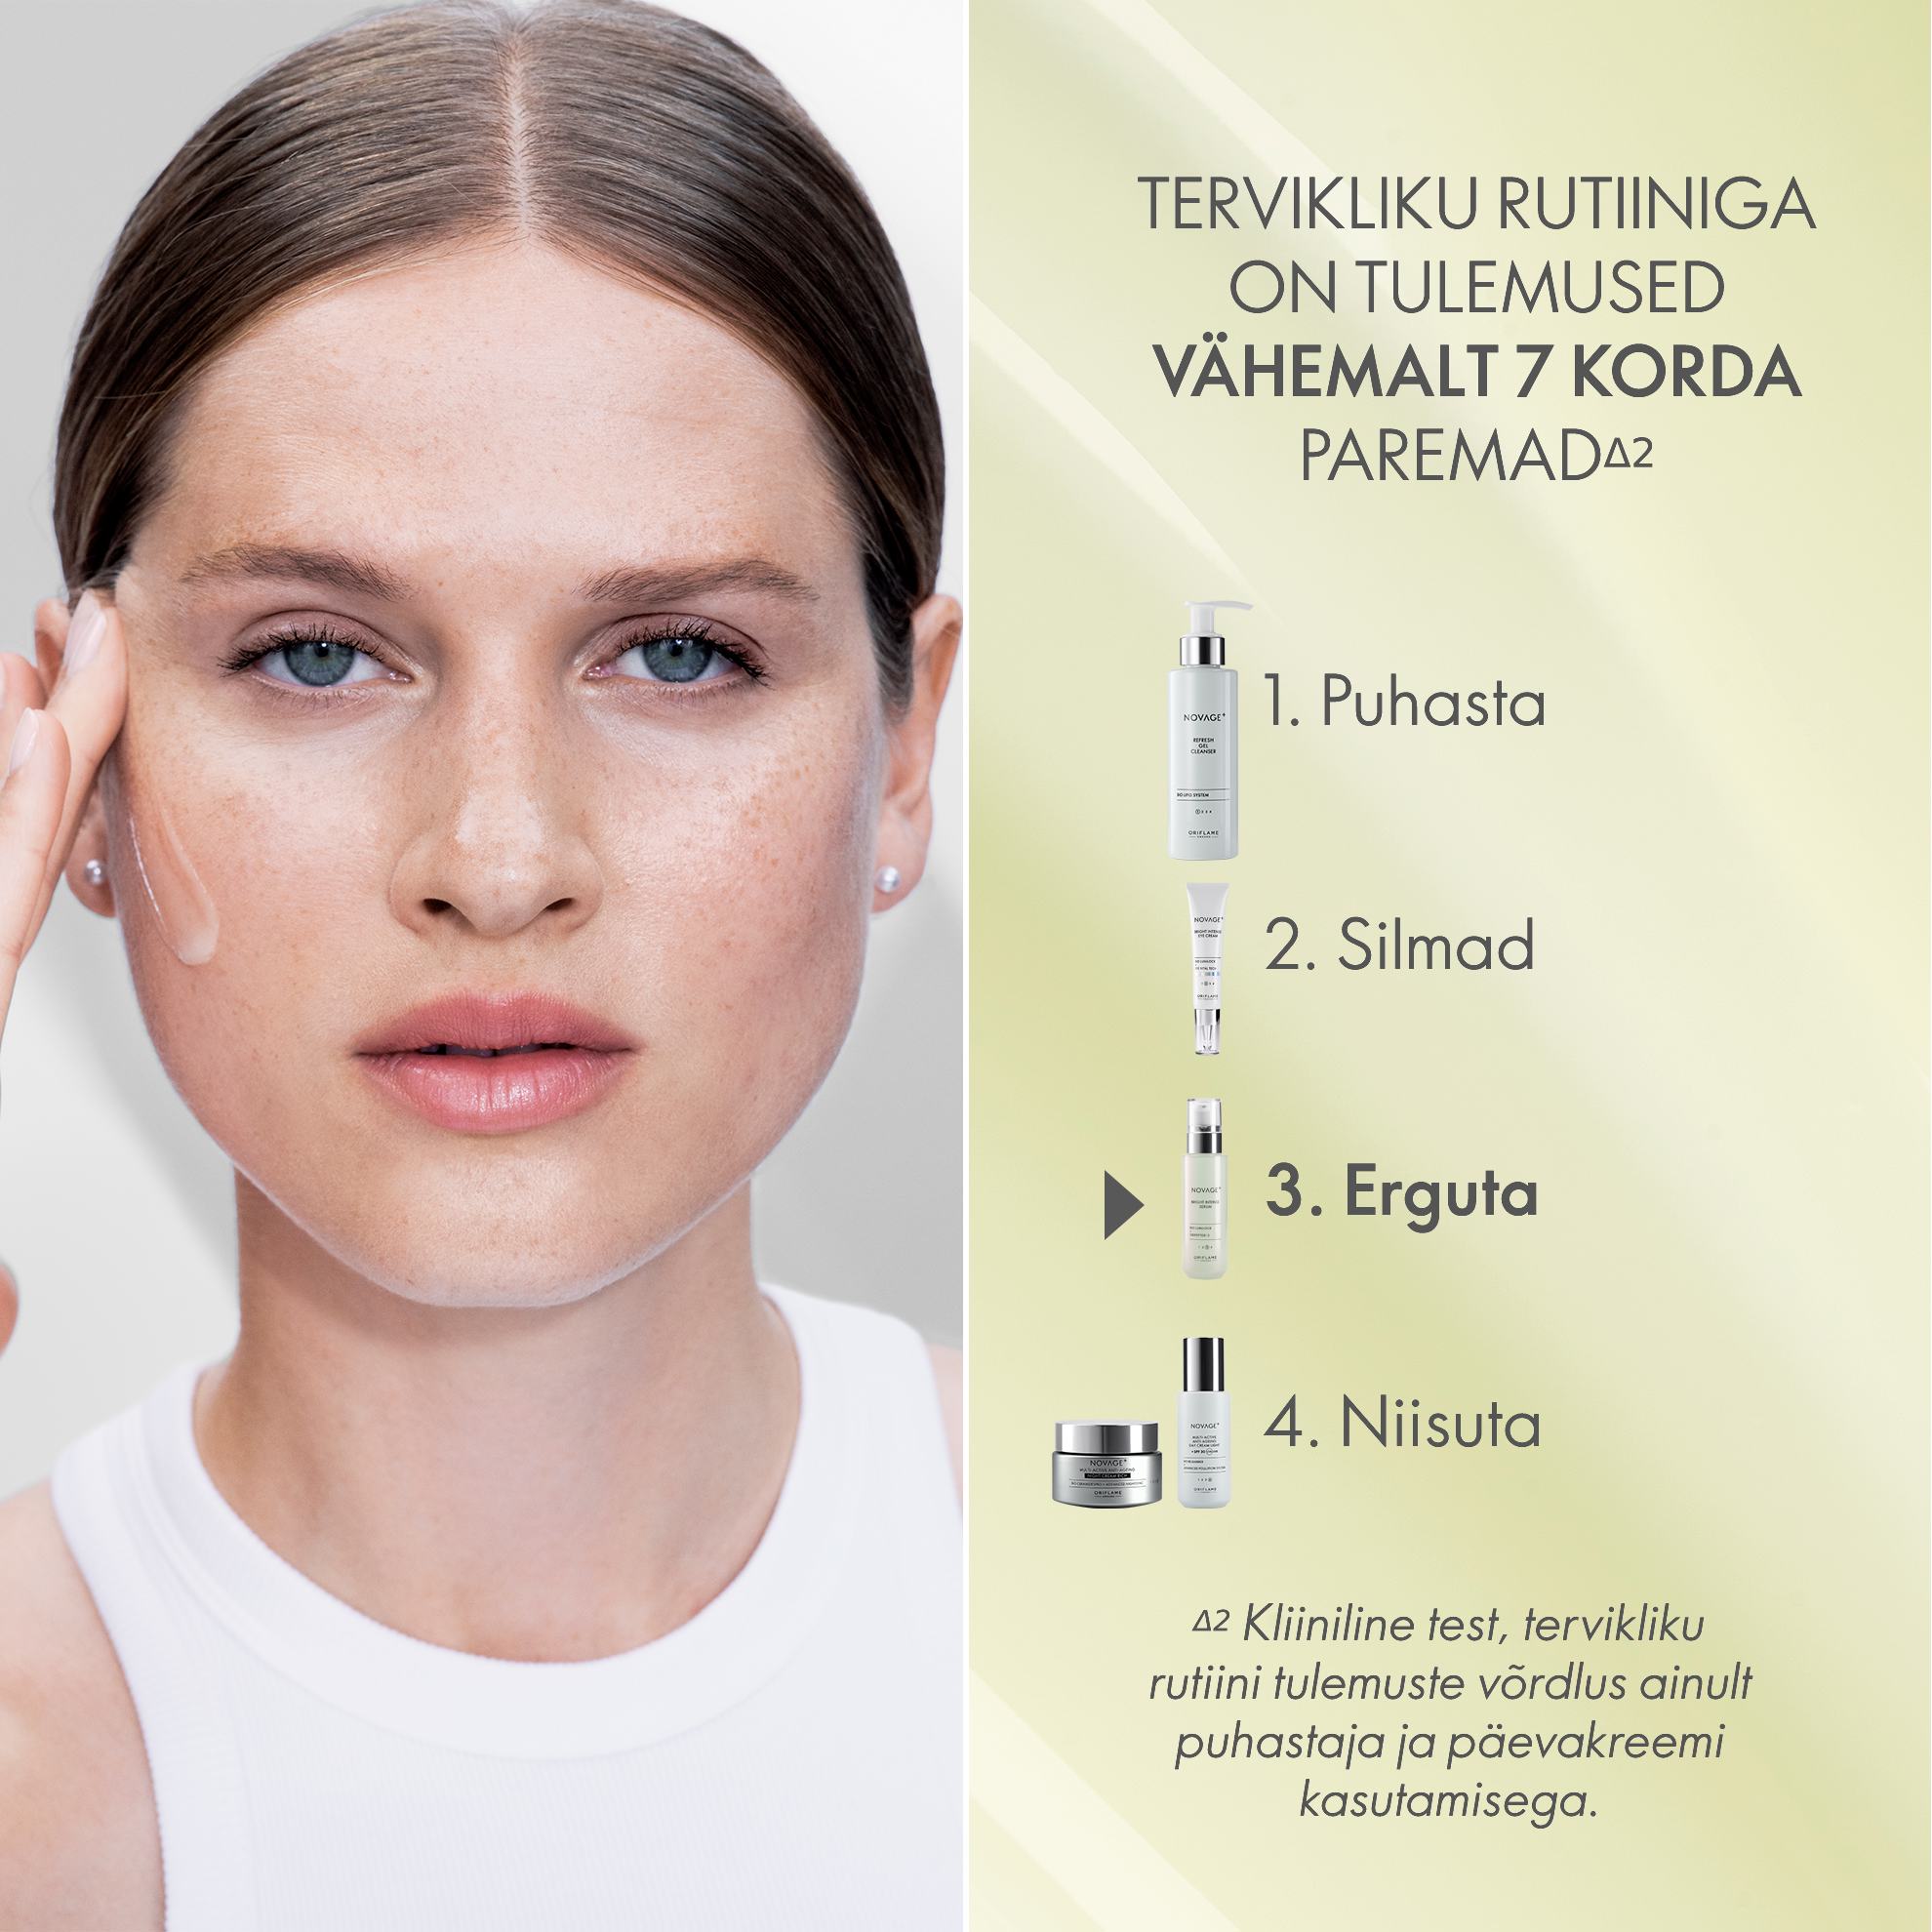 https://media-cdn.oriflame.com/productImage?externalMediaId=product-management-media%2fProducts%2f41040%2fEE%2f41040_4.png&id=17585995&version=2